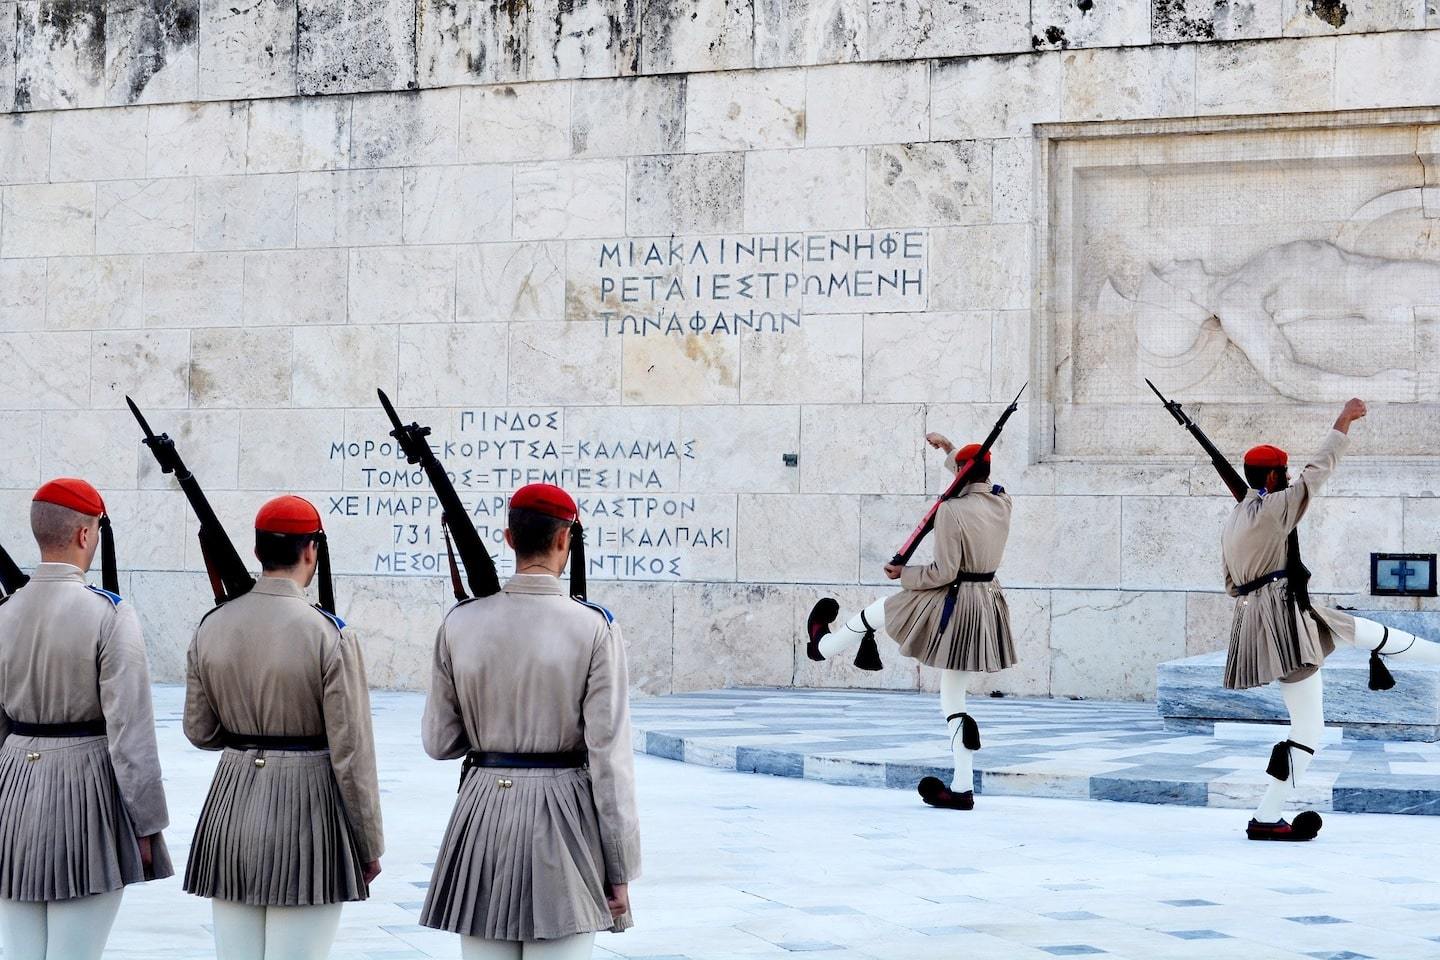 The changing of the guards outside of the Parliament building in Athens Greece